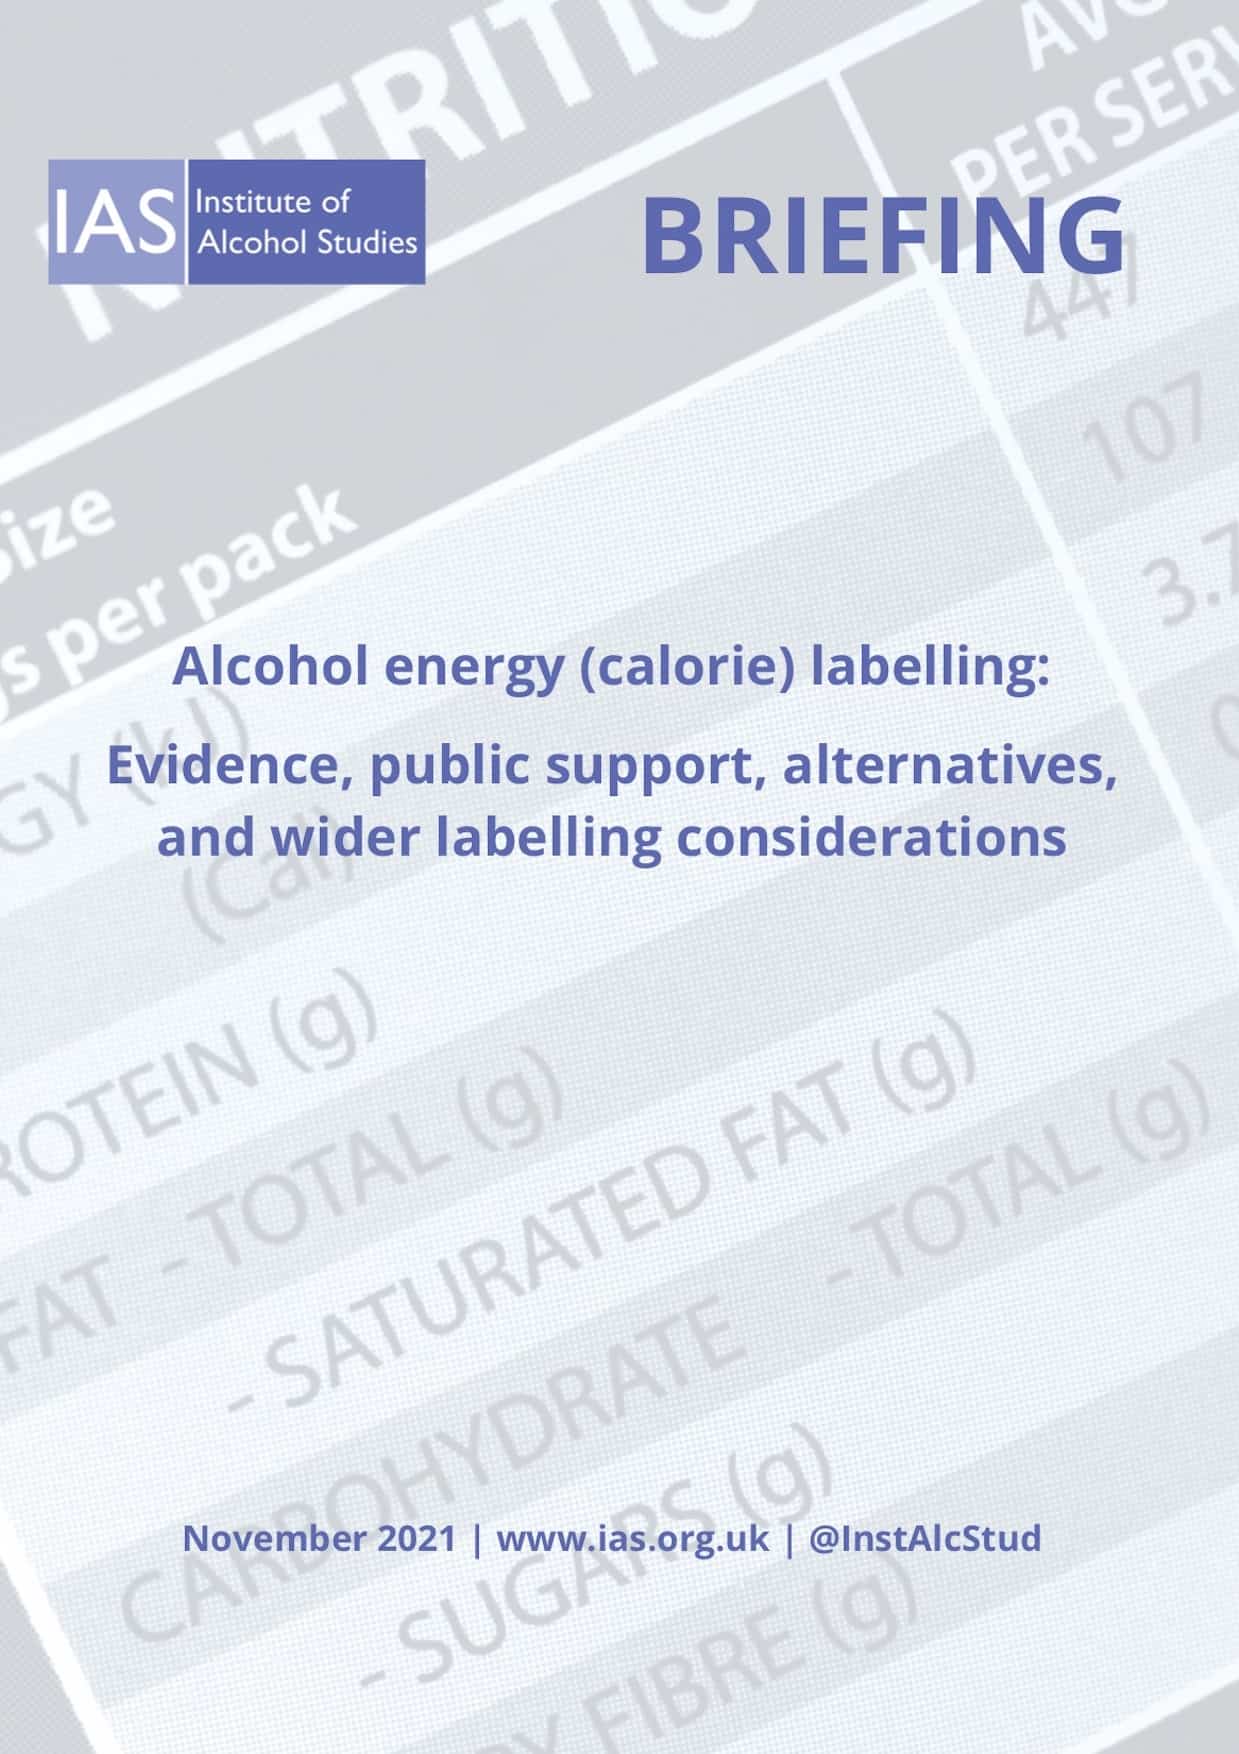 Alcohol energy (calorie) labelling: Evidence, public support, alternatives, and wider labelling considerations